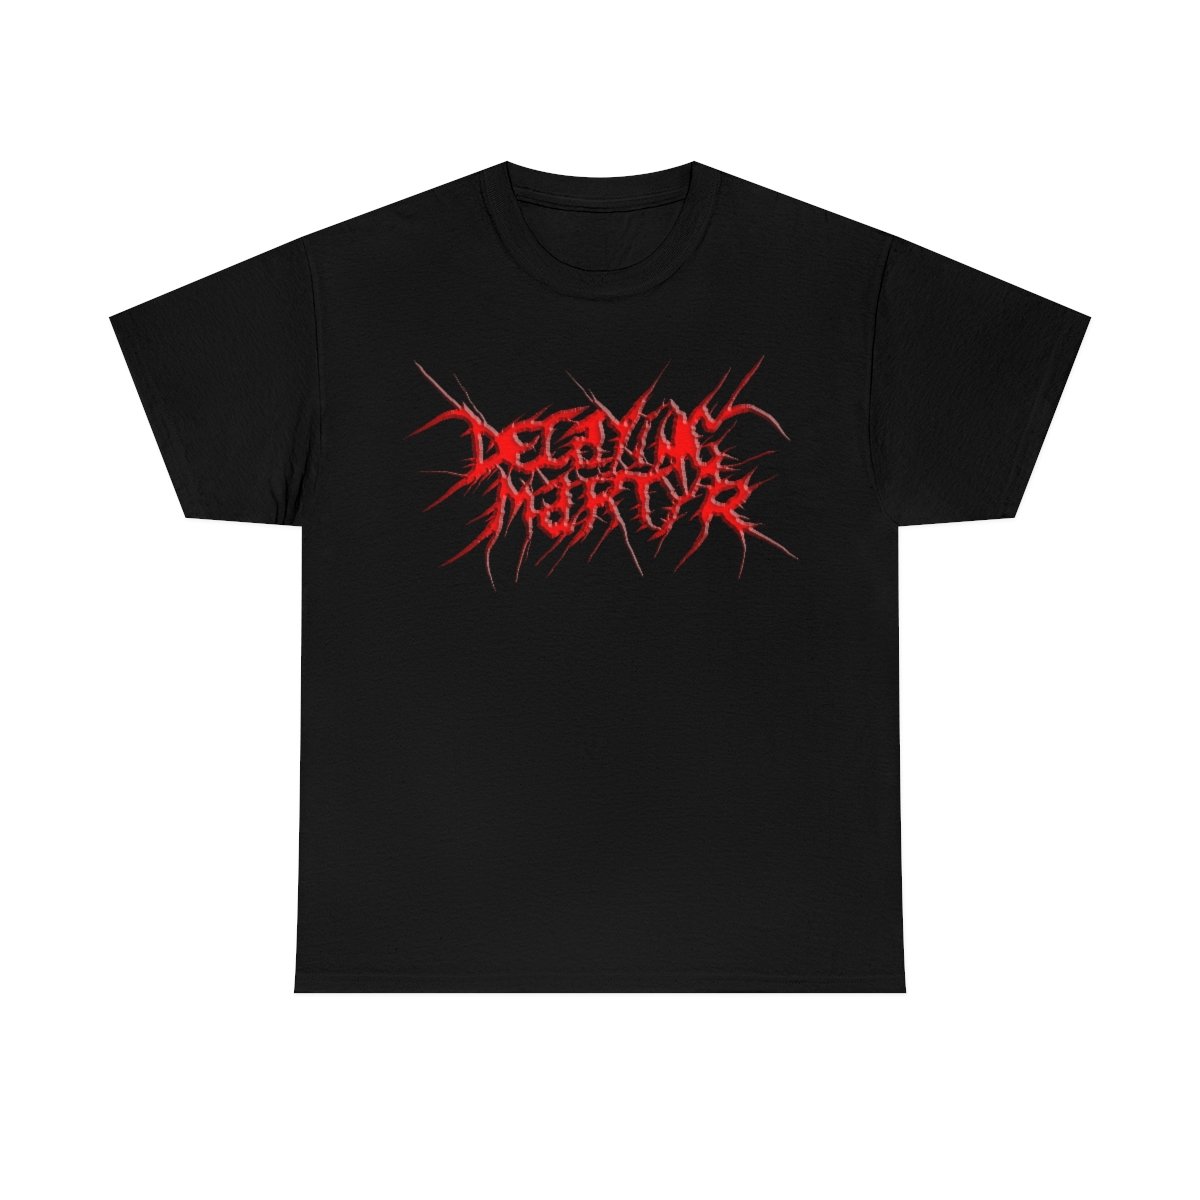 Decaying Martyr 3D Logo (Red) Short Sleeve Tshirt (5000)